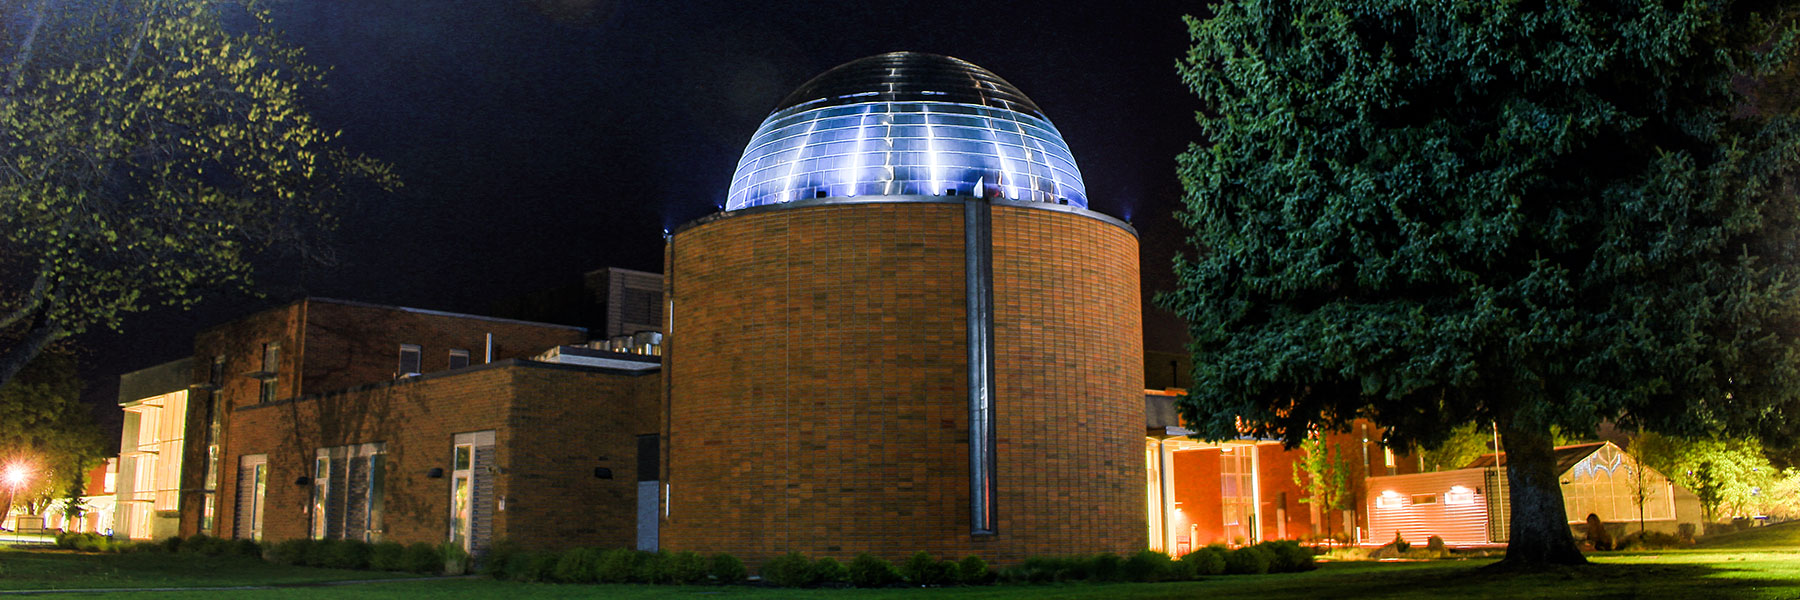 Outdoor view of the Science Building with the Planetarium in full view at night